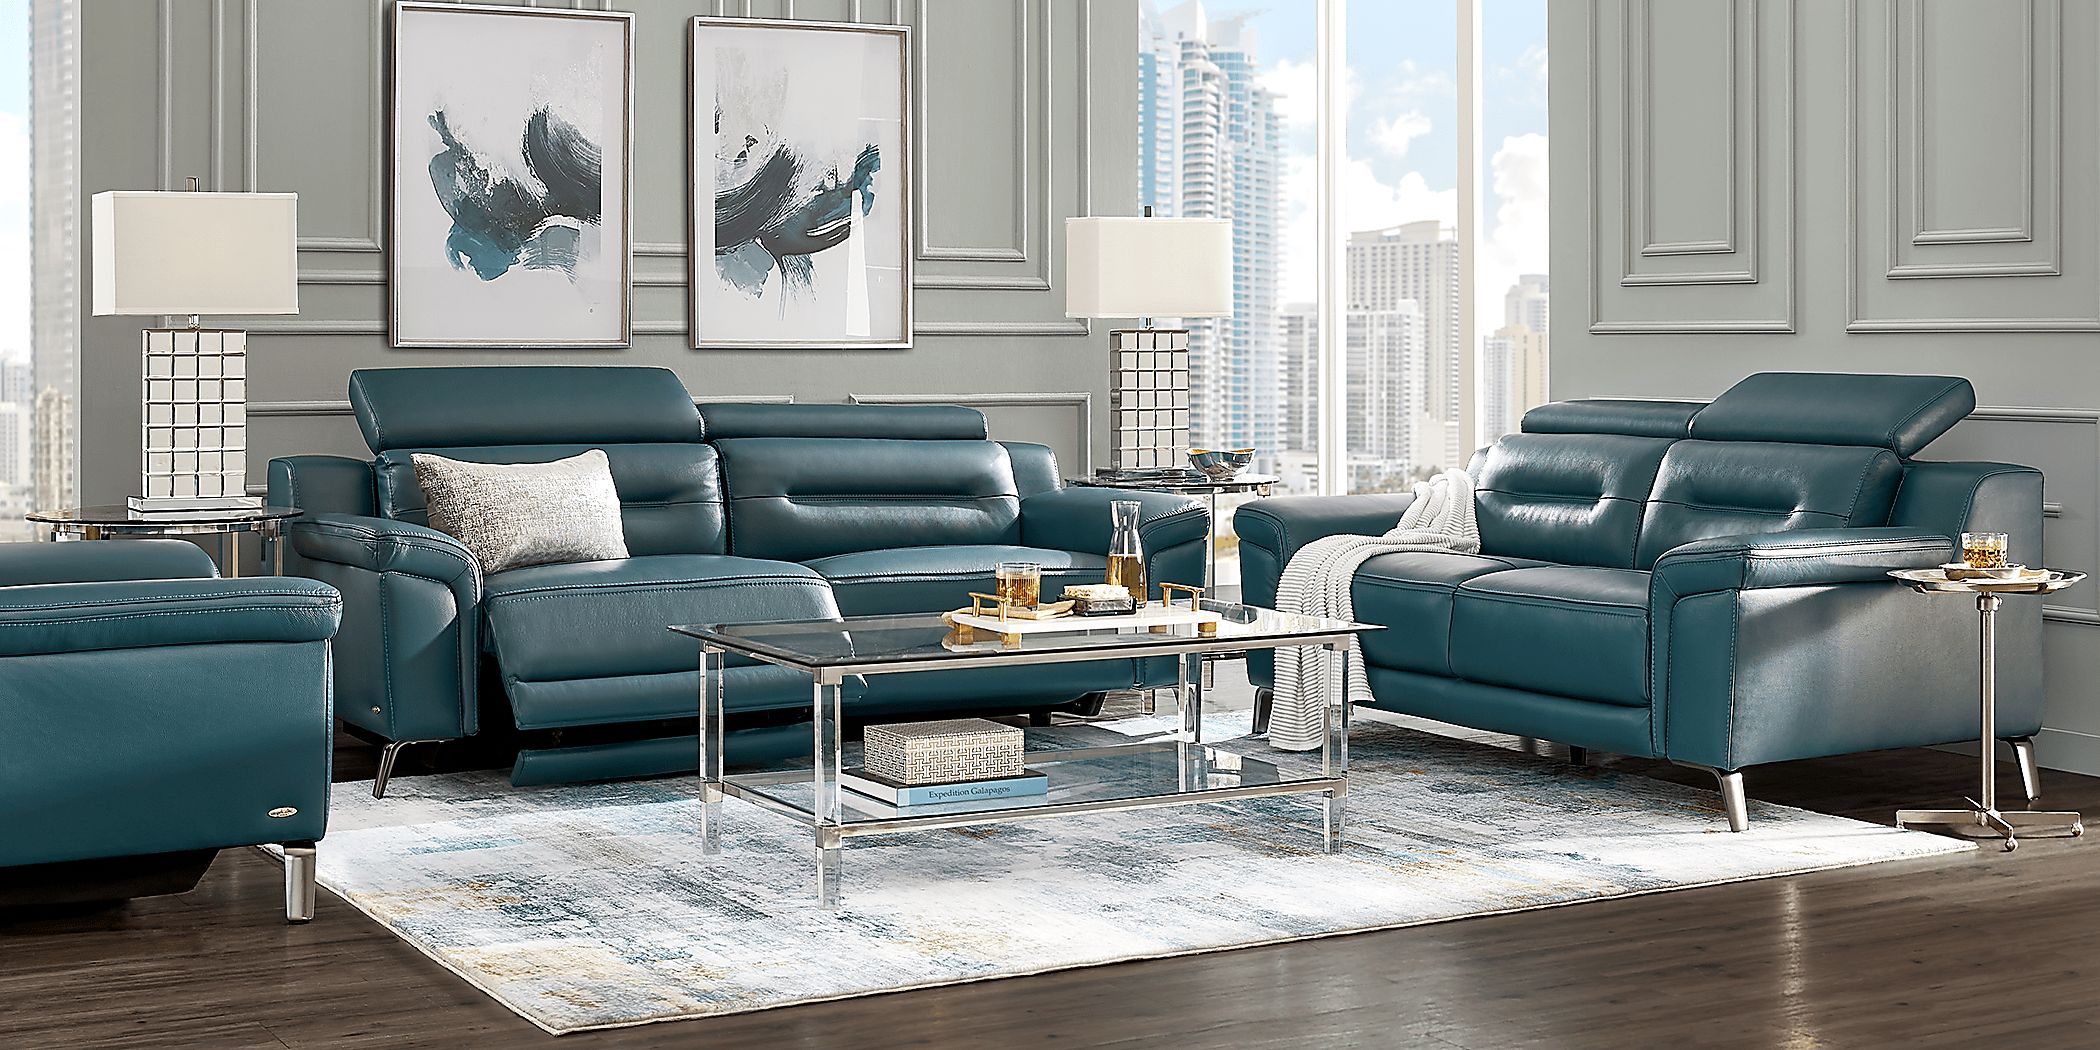 Castella Teal Leather 3 Pc Dual Power Reclining Living Room